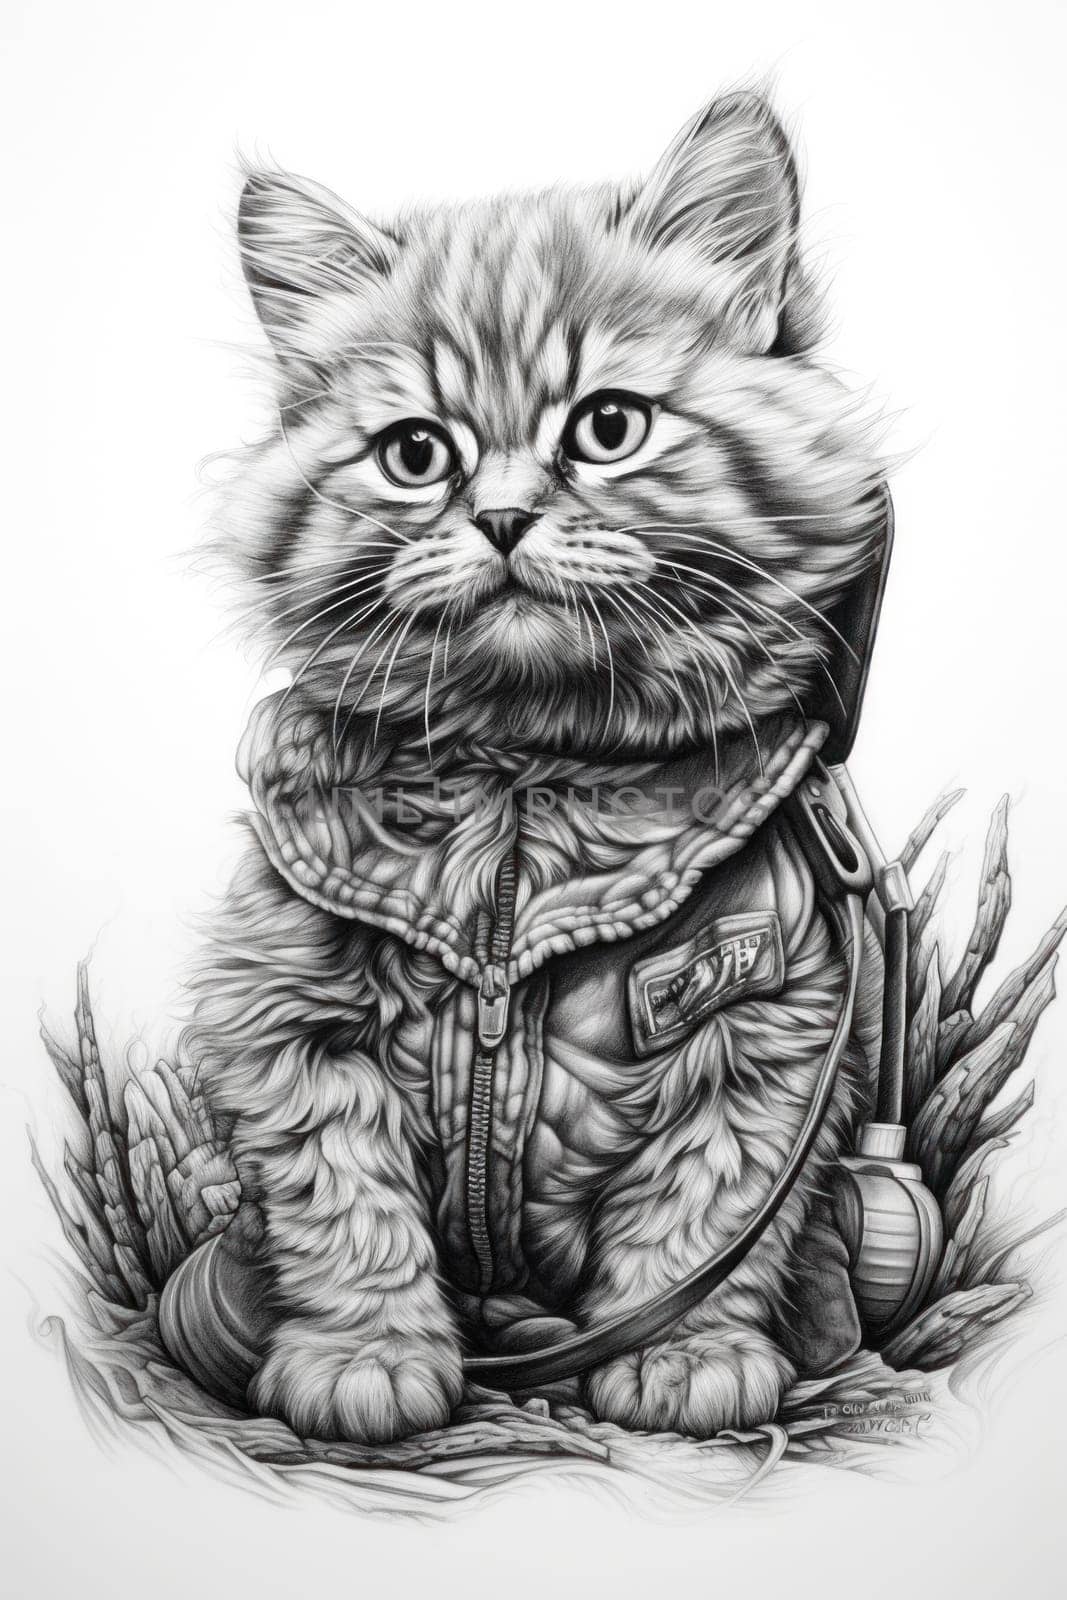 A drawing of a cat wearing a jacket, AI by starush